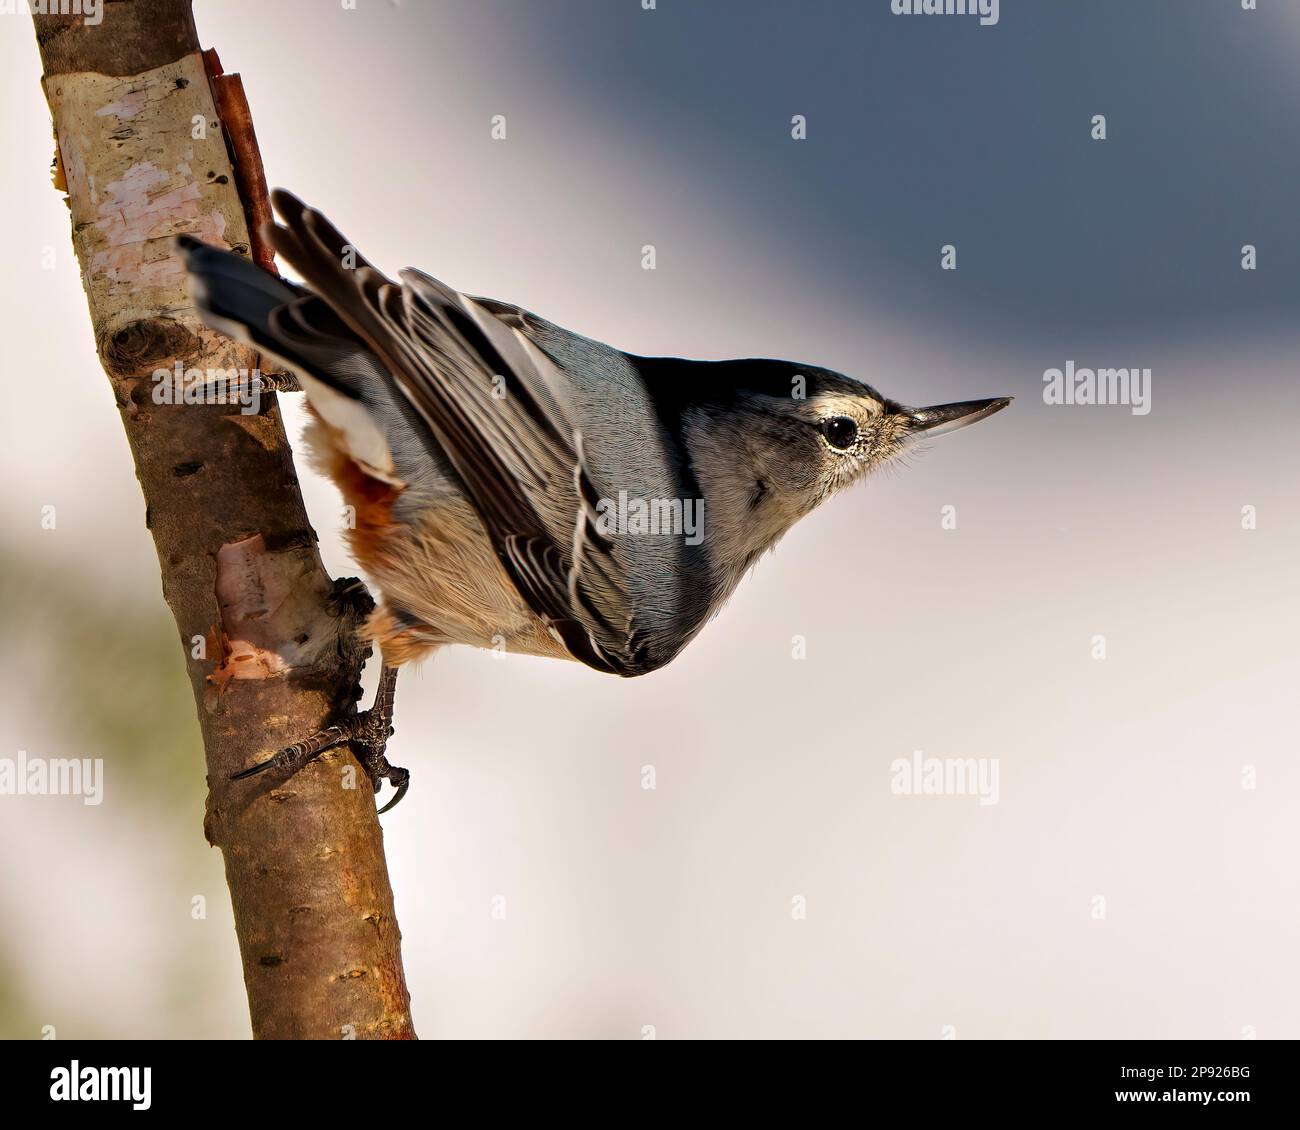 White-breasted Nuthatch perched on a tree branch with a blur background in its environment and habitat surrounding. Nuthatch Portrait. Stock Photo